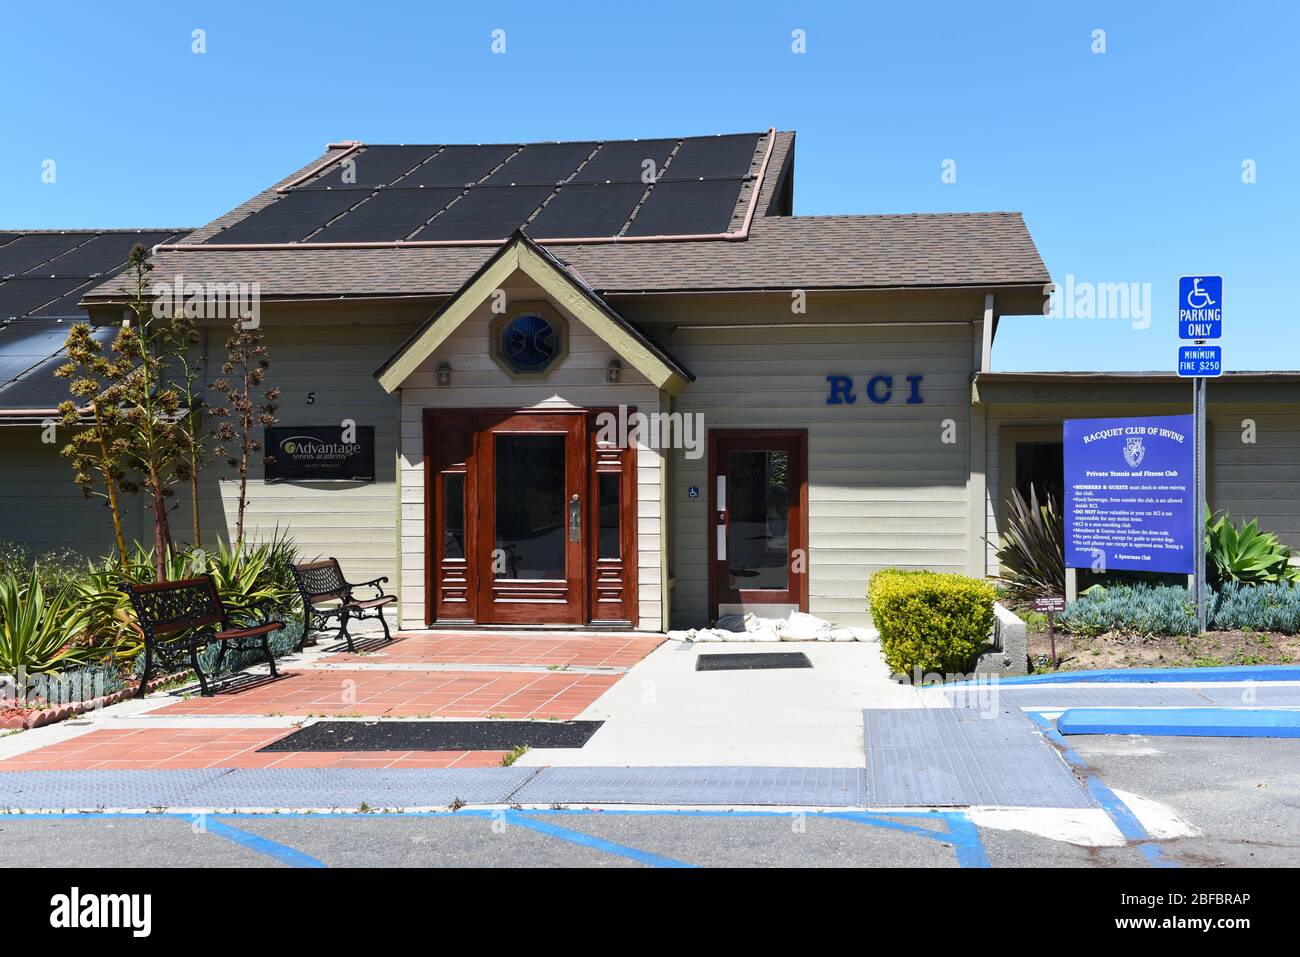 IRVINE, CALIFORNIA - 16 APRIL 2020: Entrance at The Racquet Club of Irvine, RCI, is a Tennis Facility that also offers full fitness facilities and oly Stock Photo